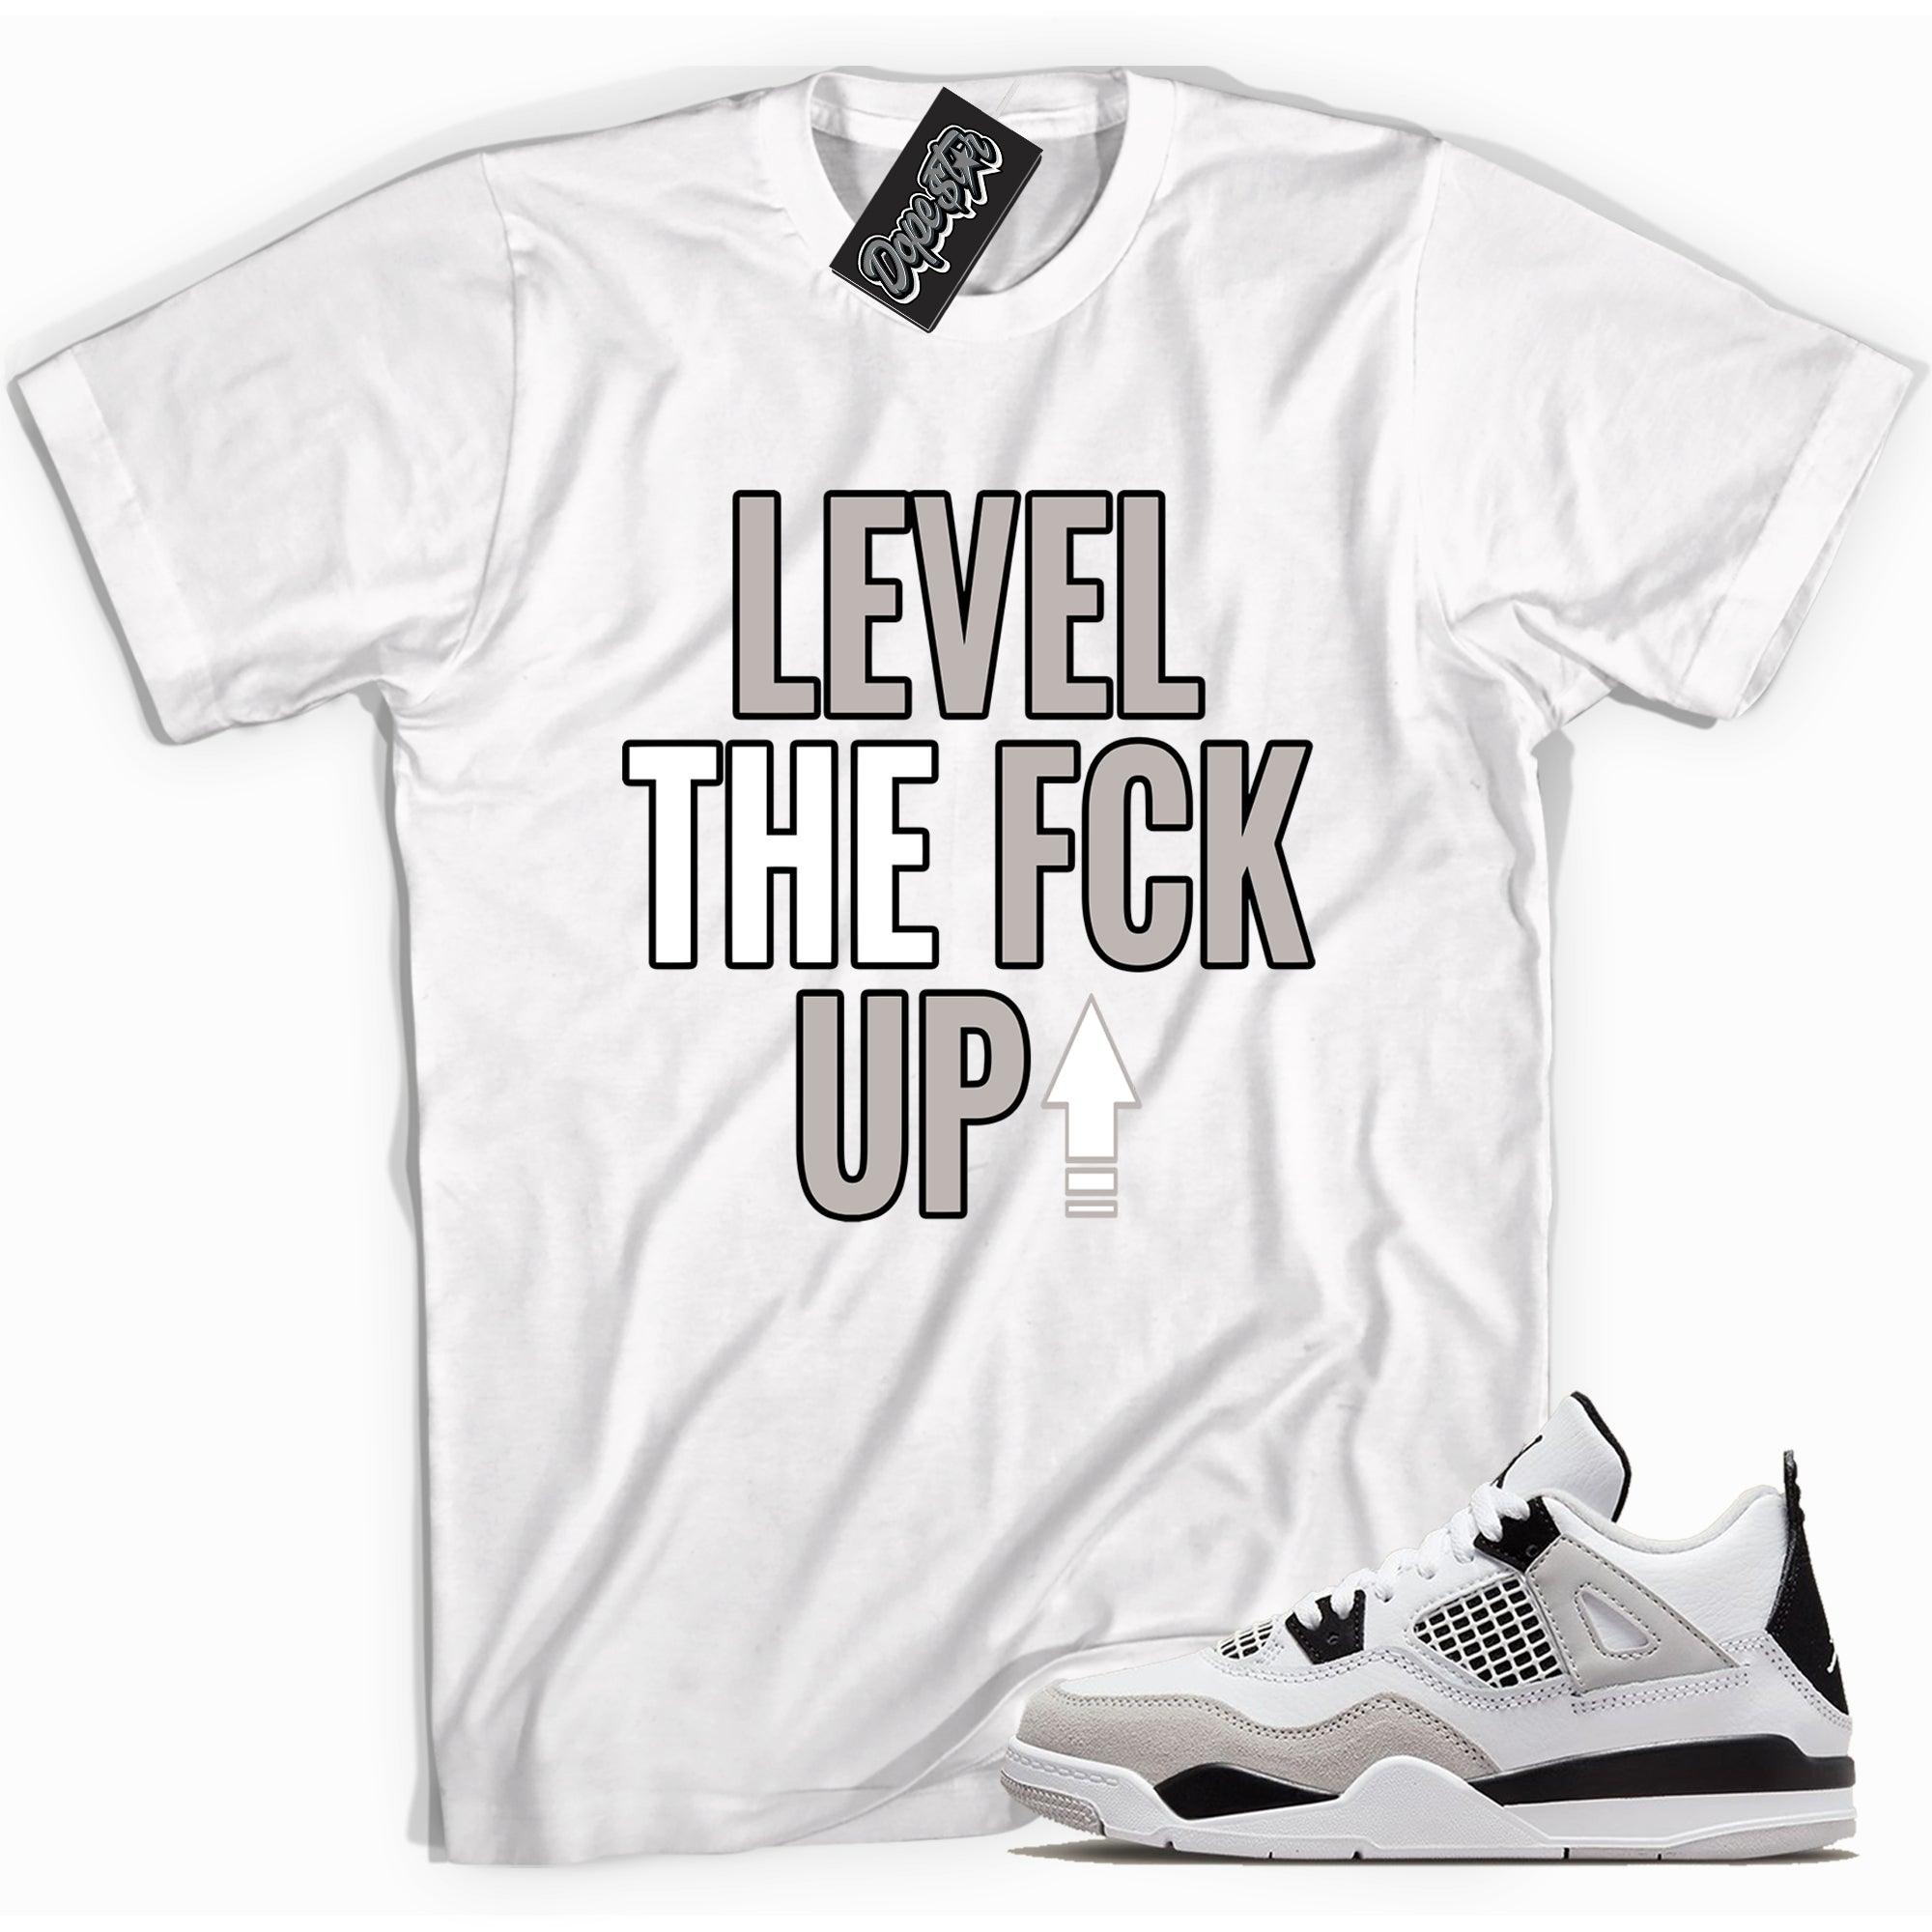 Cool white graphic tee with 'Level Up' print, that perfectly matches Air Jordan 4 Retro Military Black sneakers.